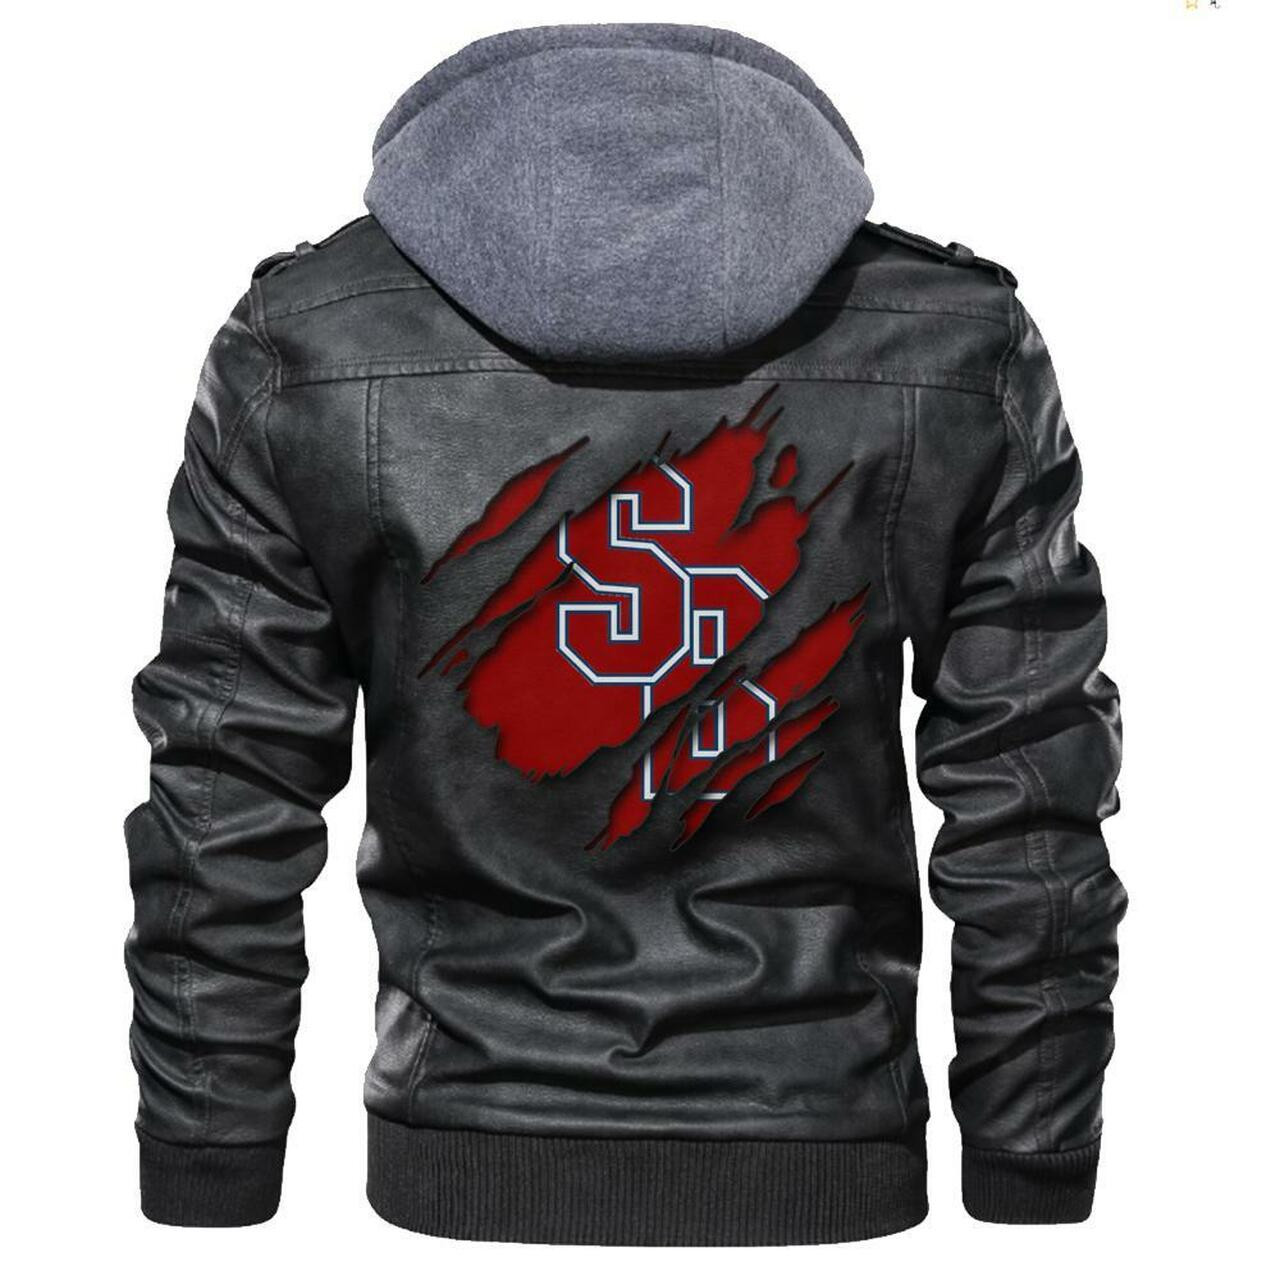 Check out and find the right leather jacket below 119